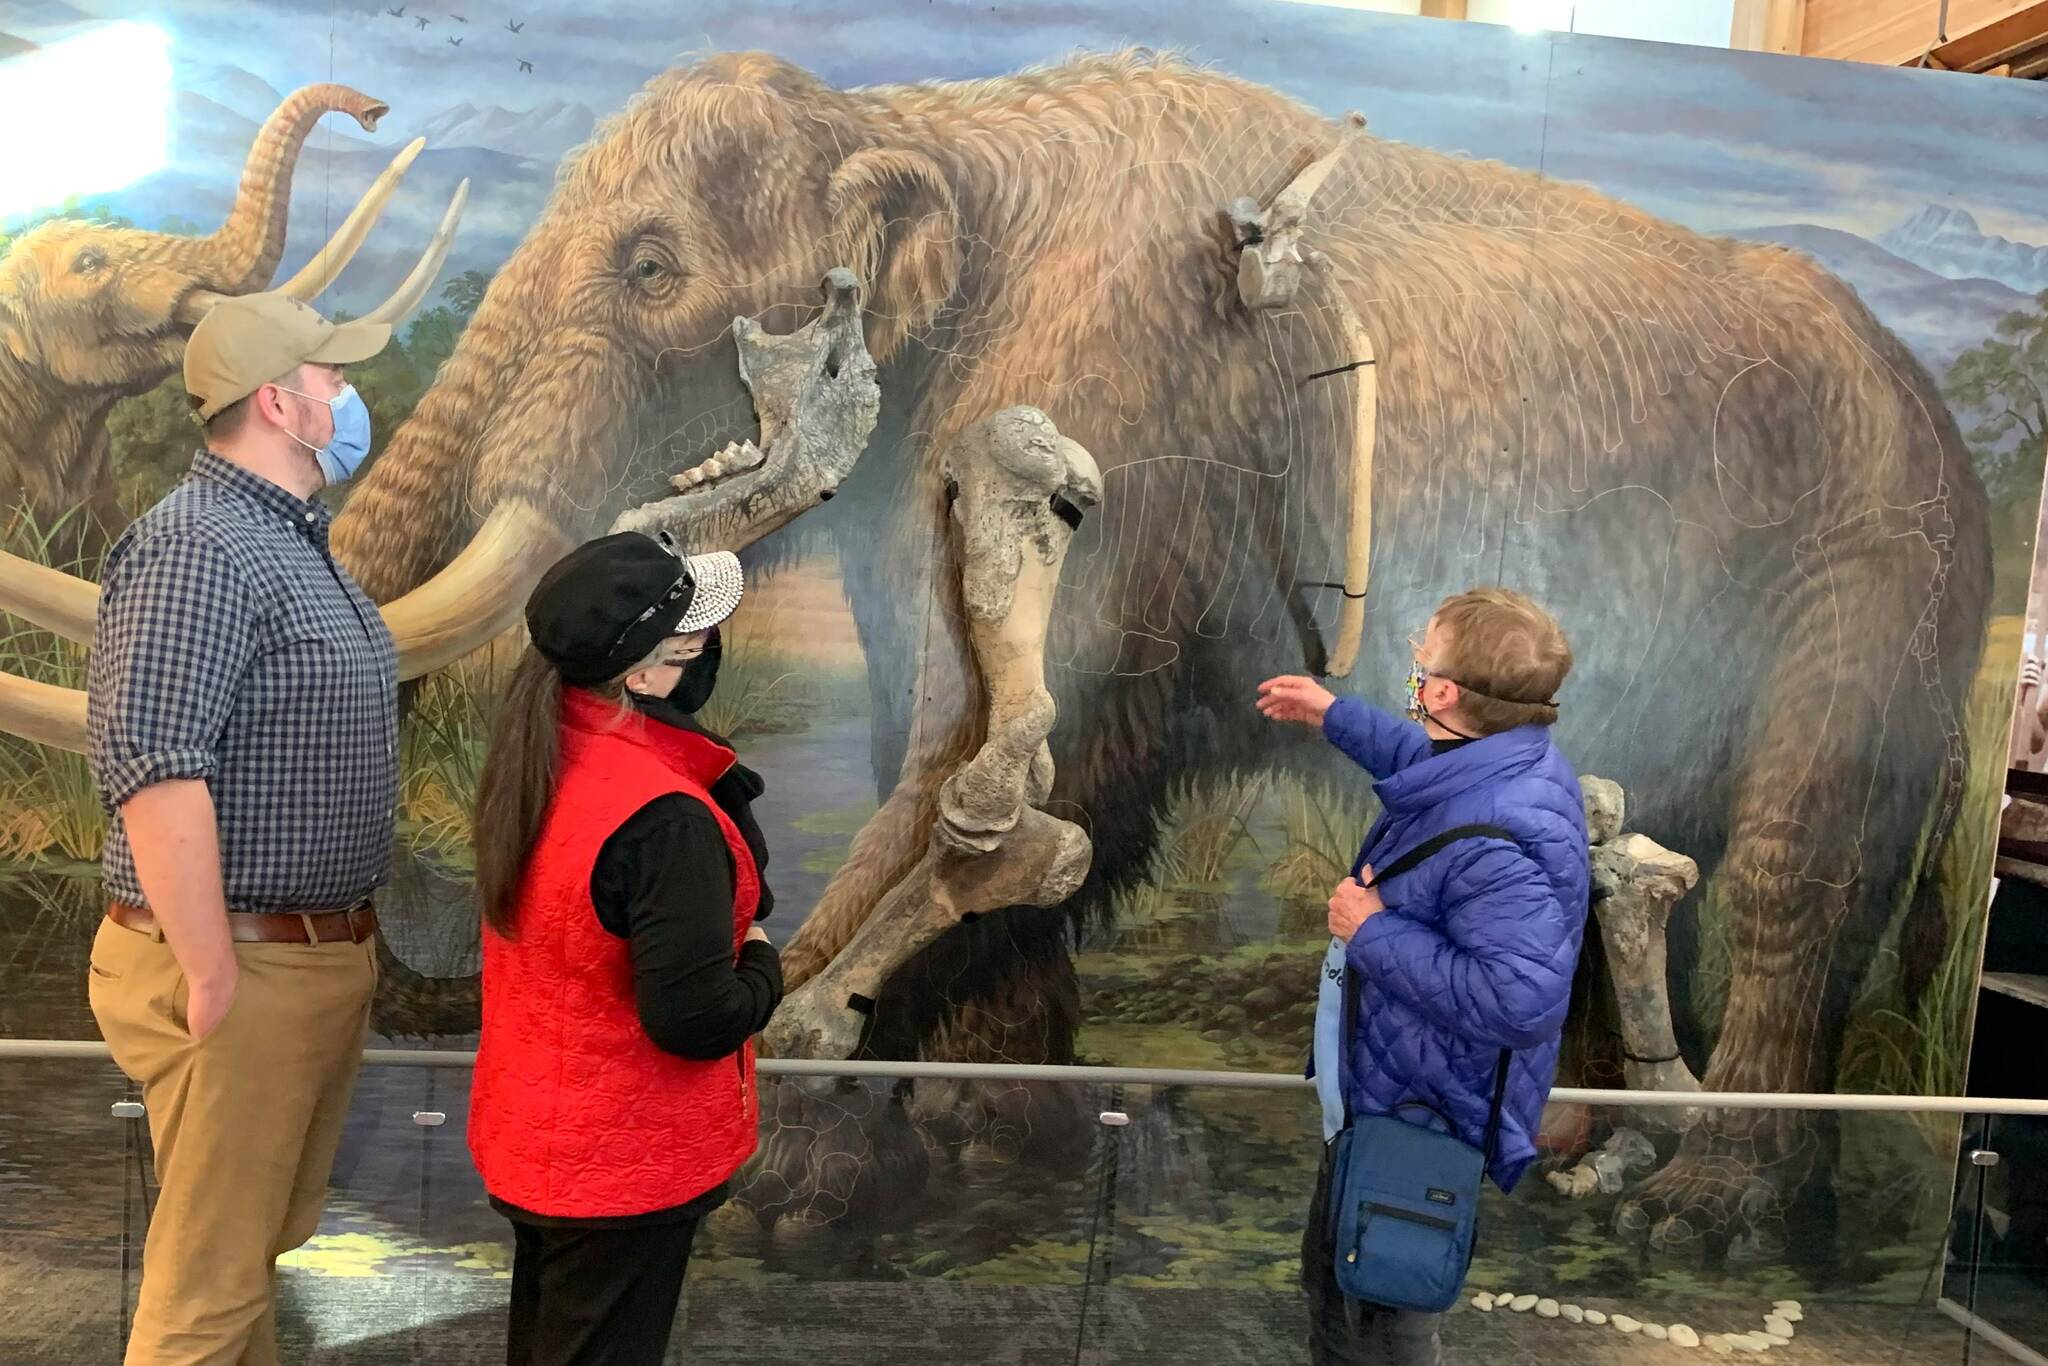 In November 2020, Zachary Newell, a researcher at the Center for the Study of the First Americans at Texas A&M, meets with Judy Reandeau Stipe, executive director of the Sequim Museum, and Clare Manis Hatler to discuss the mastodon and its discovery. (Zachary Newell)